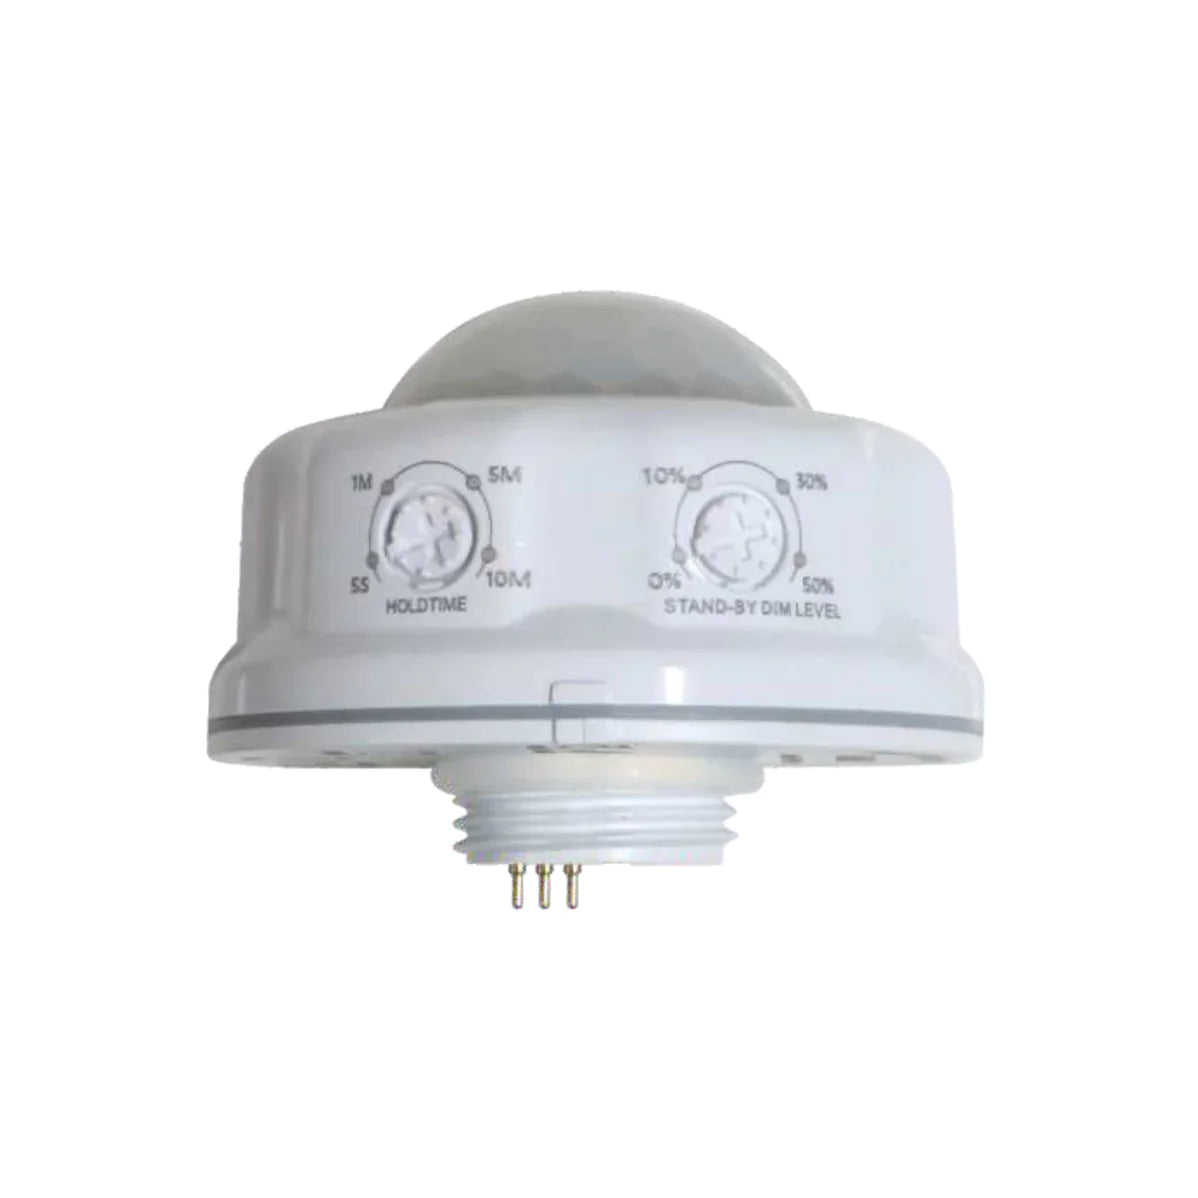 PIR Motion Sensor  - Automatic On/Off, Hands-Free Control